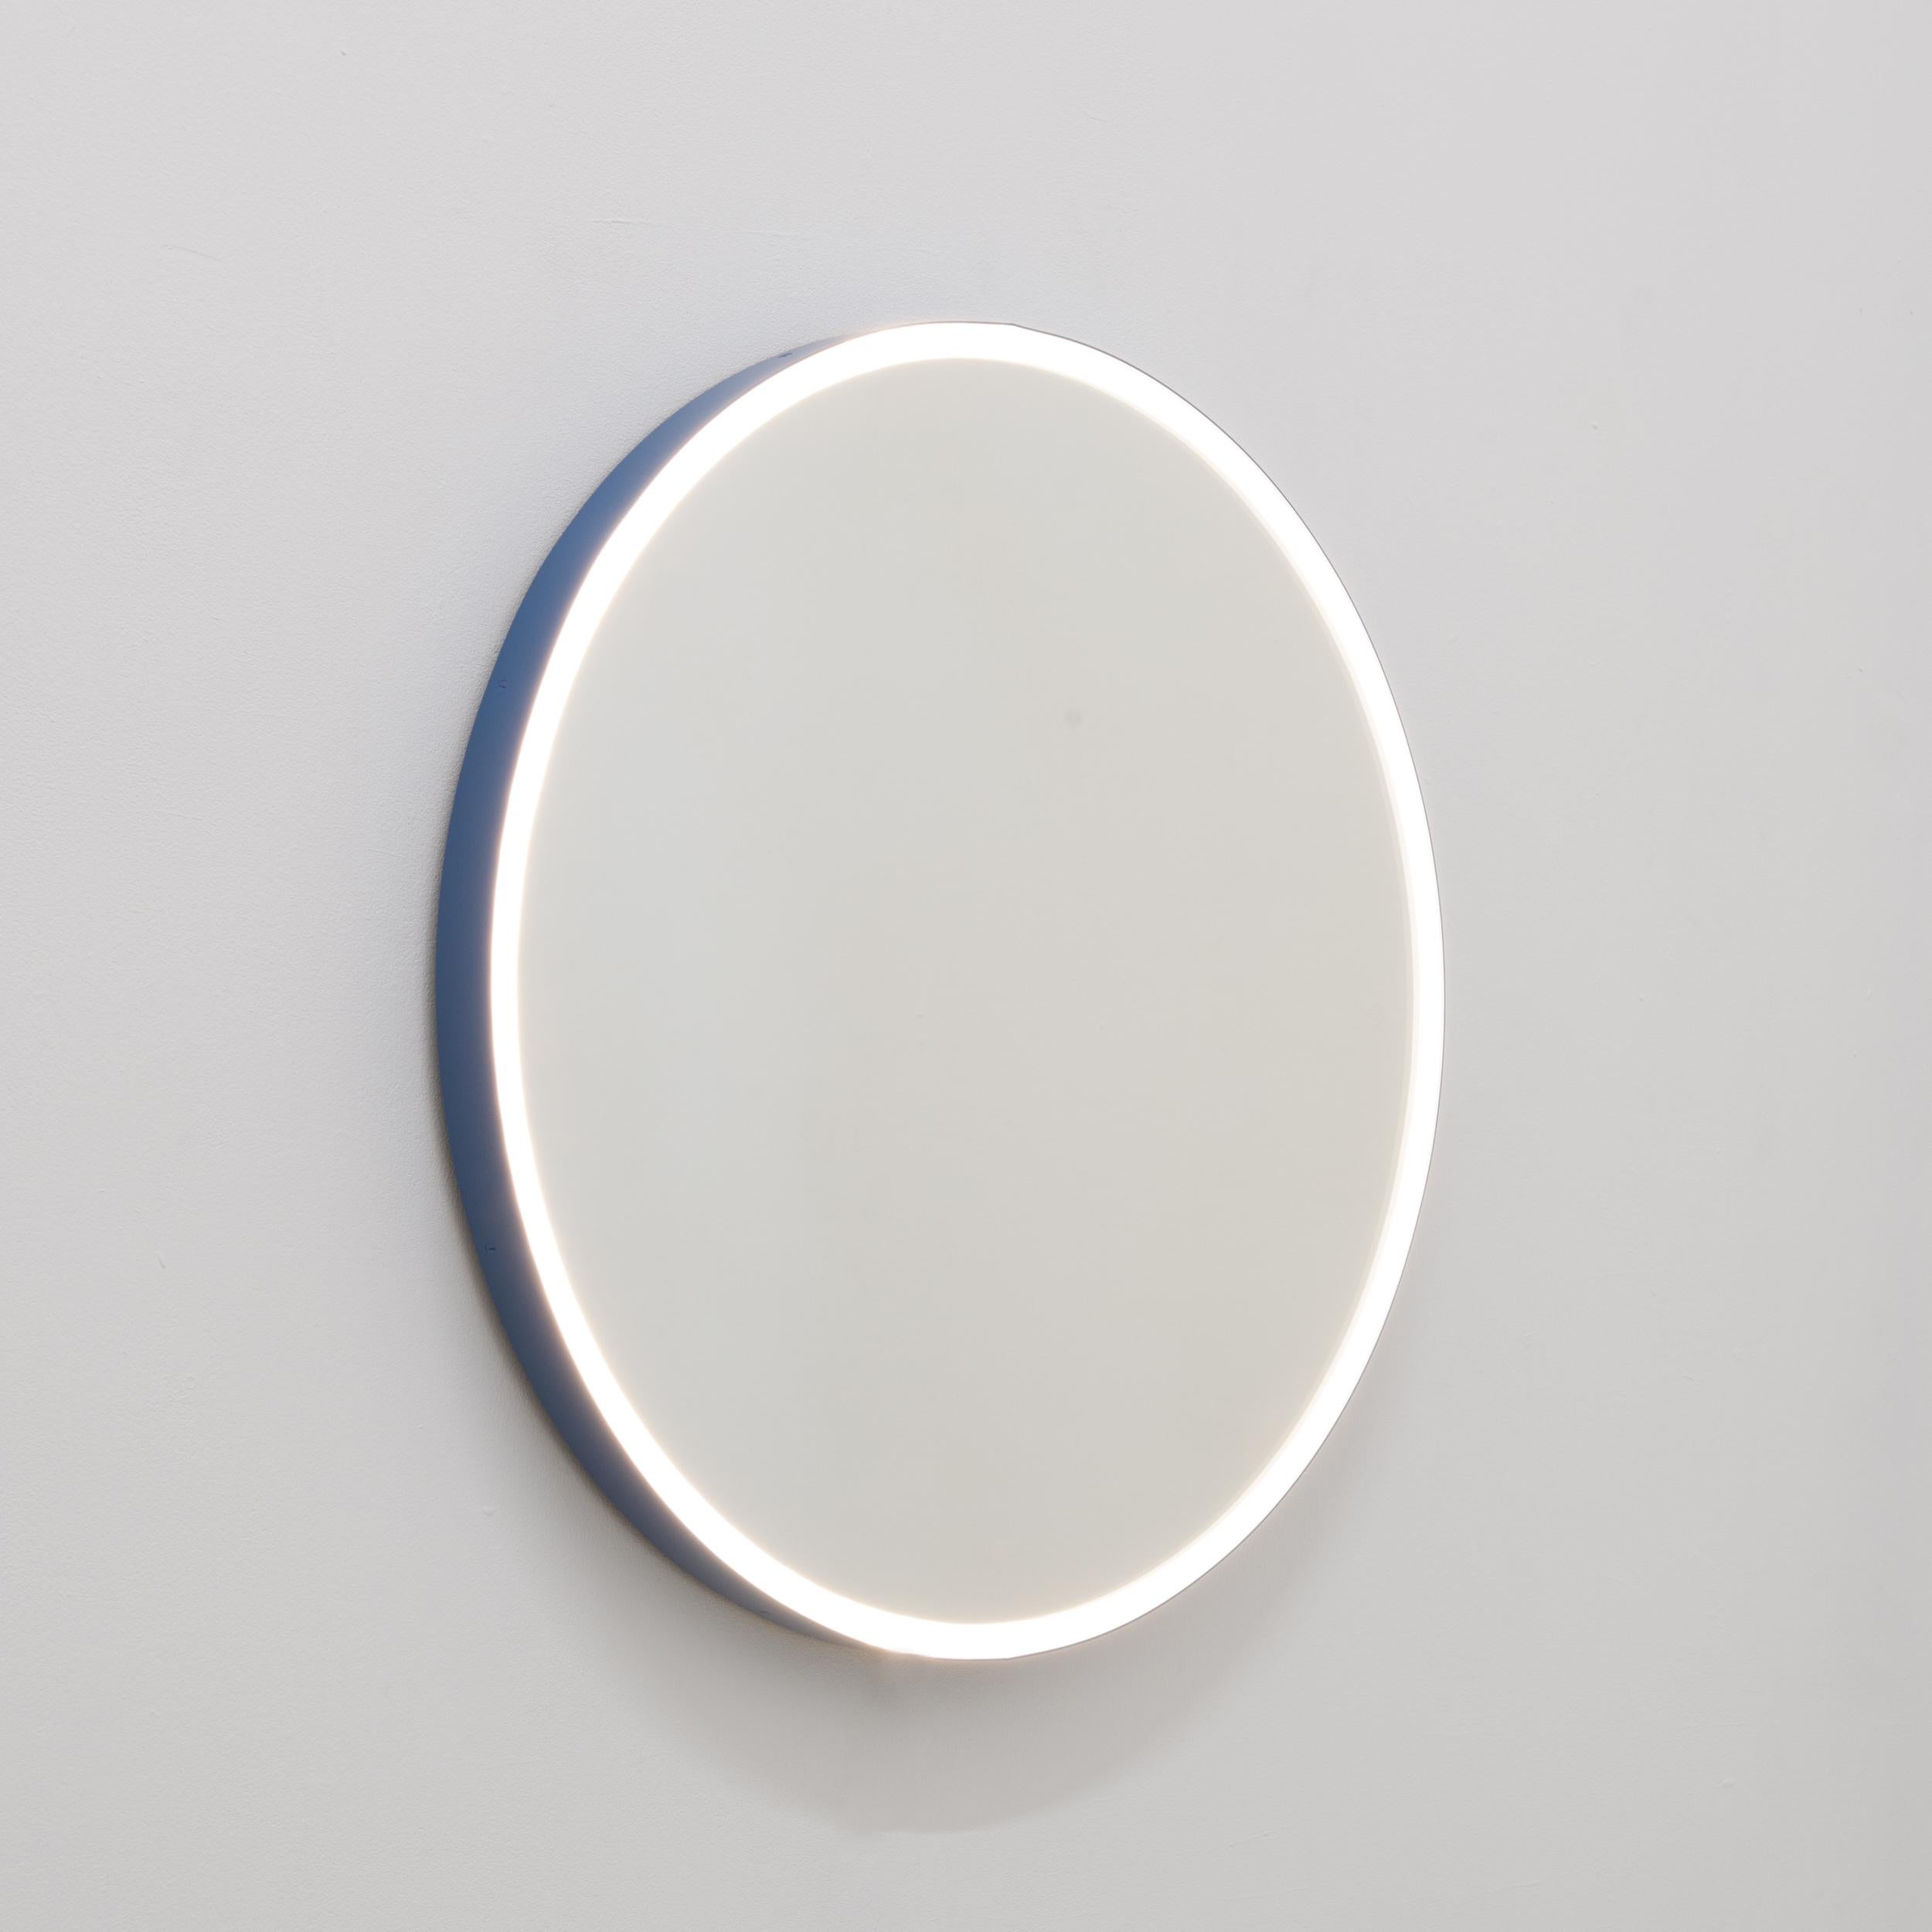 Powder-Coated Orbis Front Illuminated Round Contemporary Mirror with Blue Frame, Medium For Sale